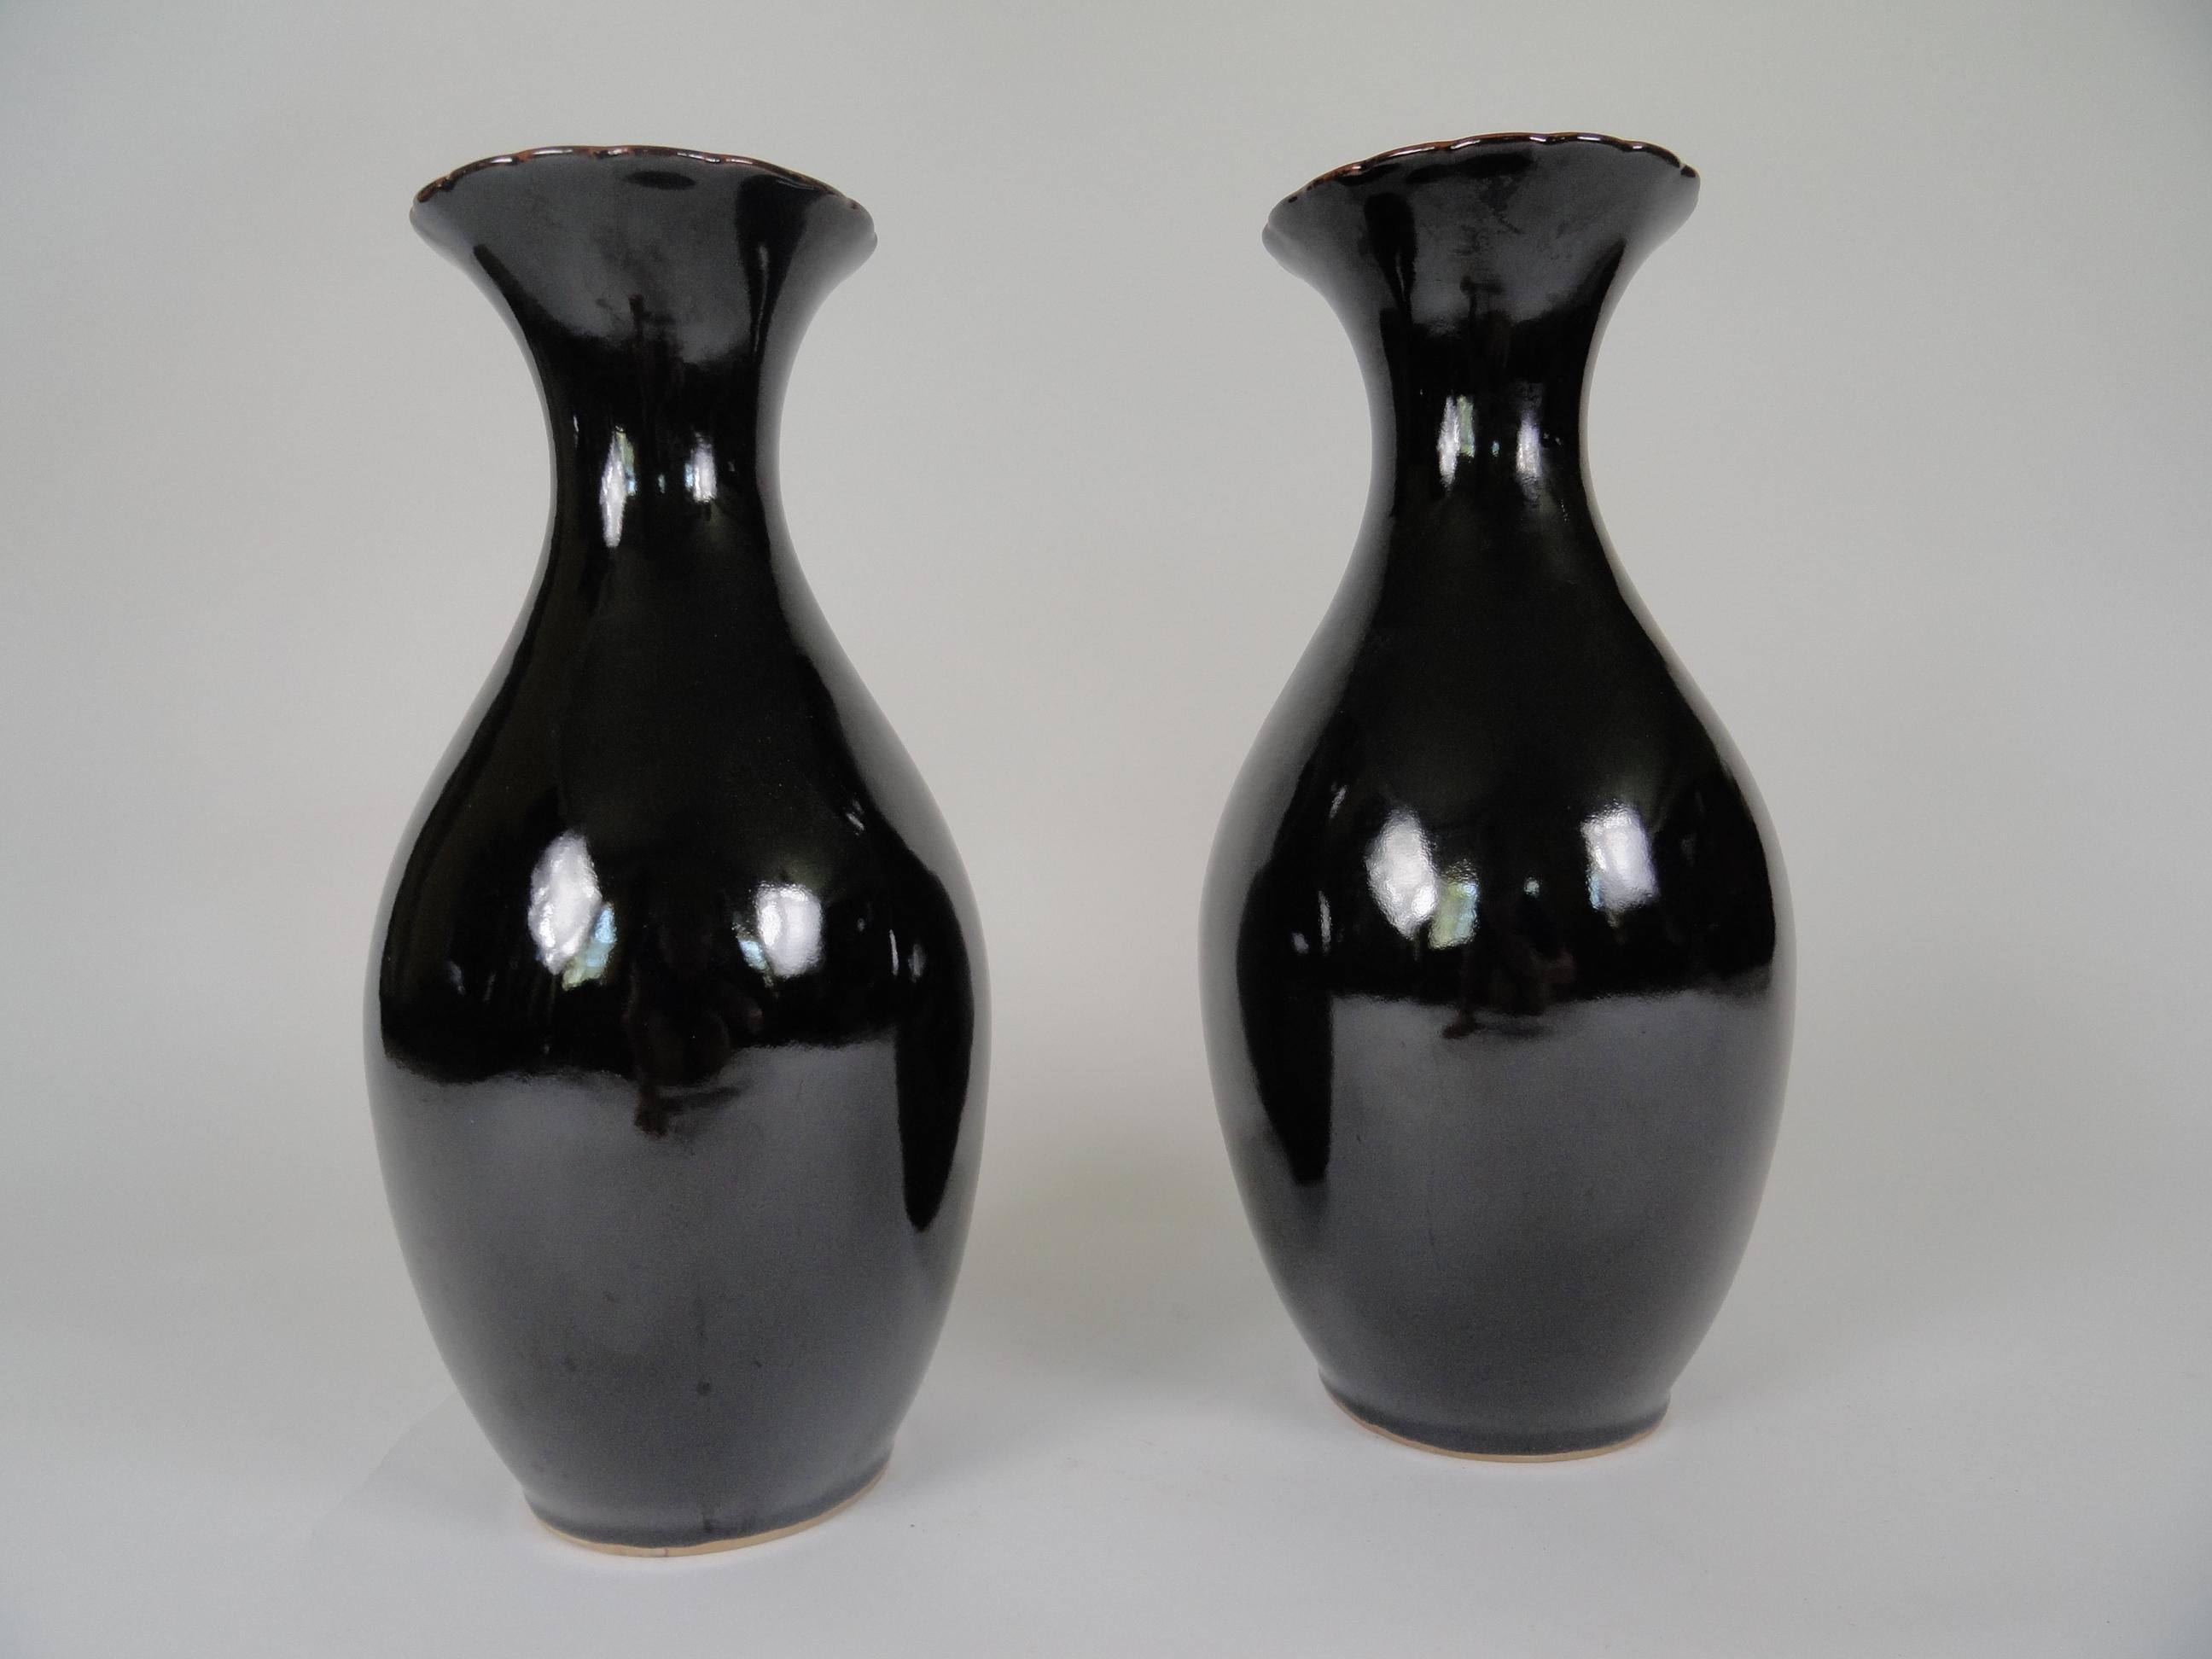 Pair of tete de negre ceramic vases, late 20th century with glazed finish.
Made in China.
One of the vases is slightly taller than the other (approximately .75 inches).